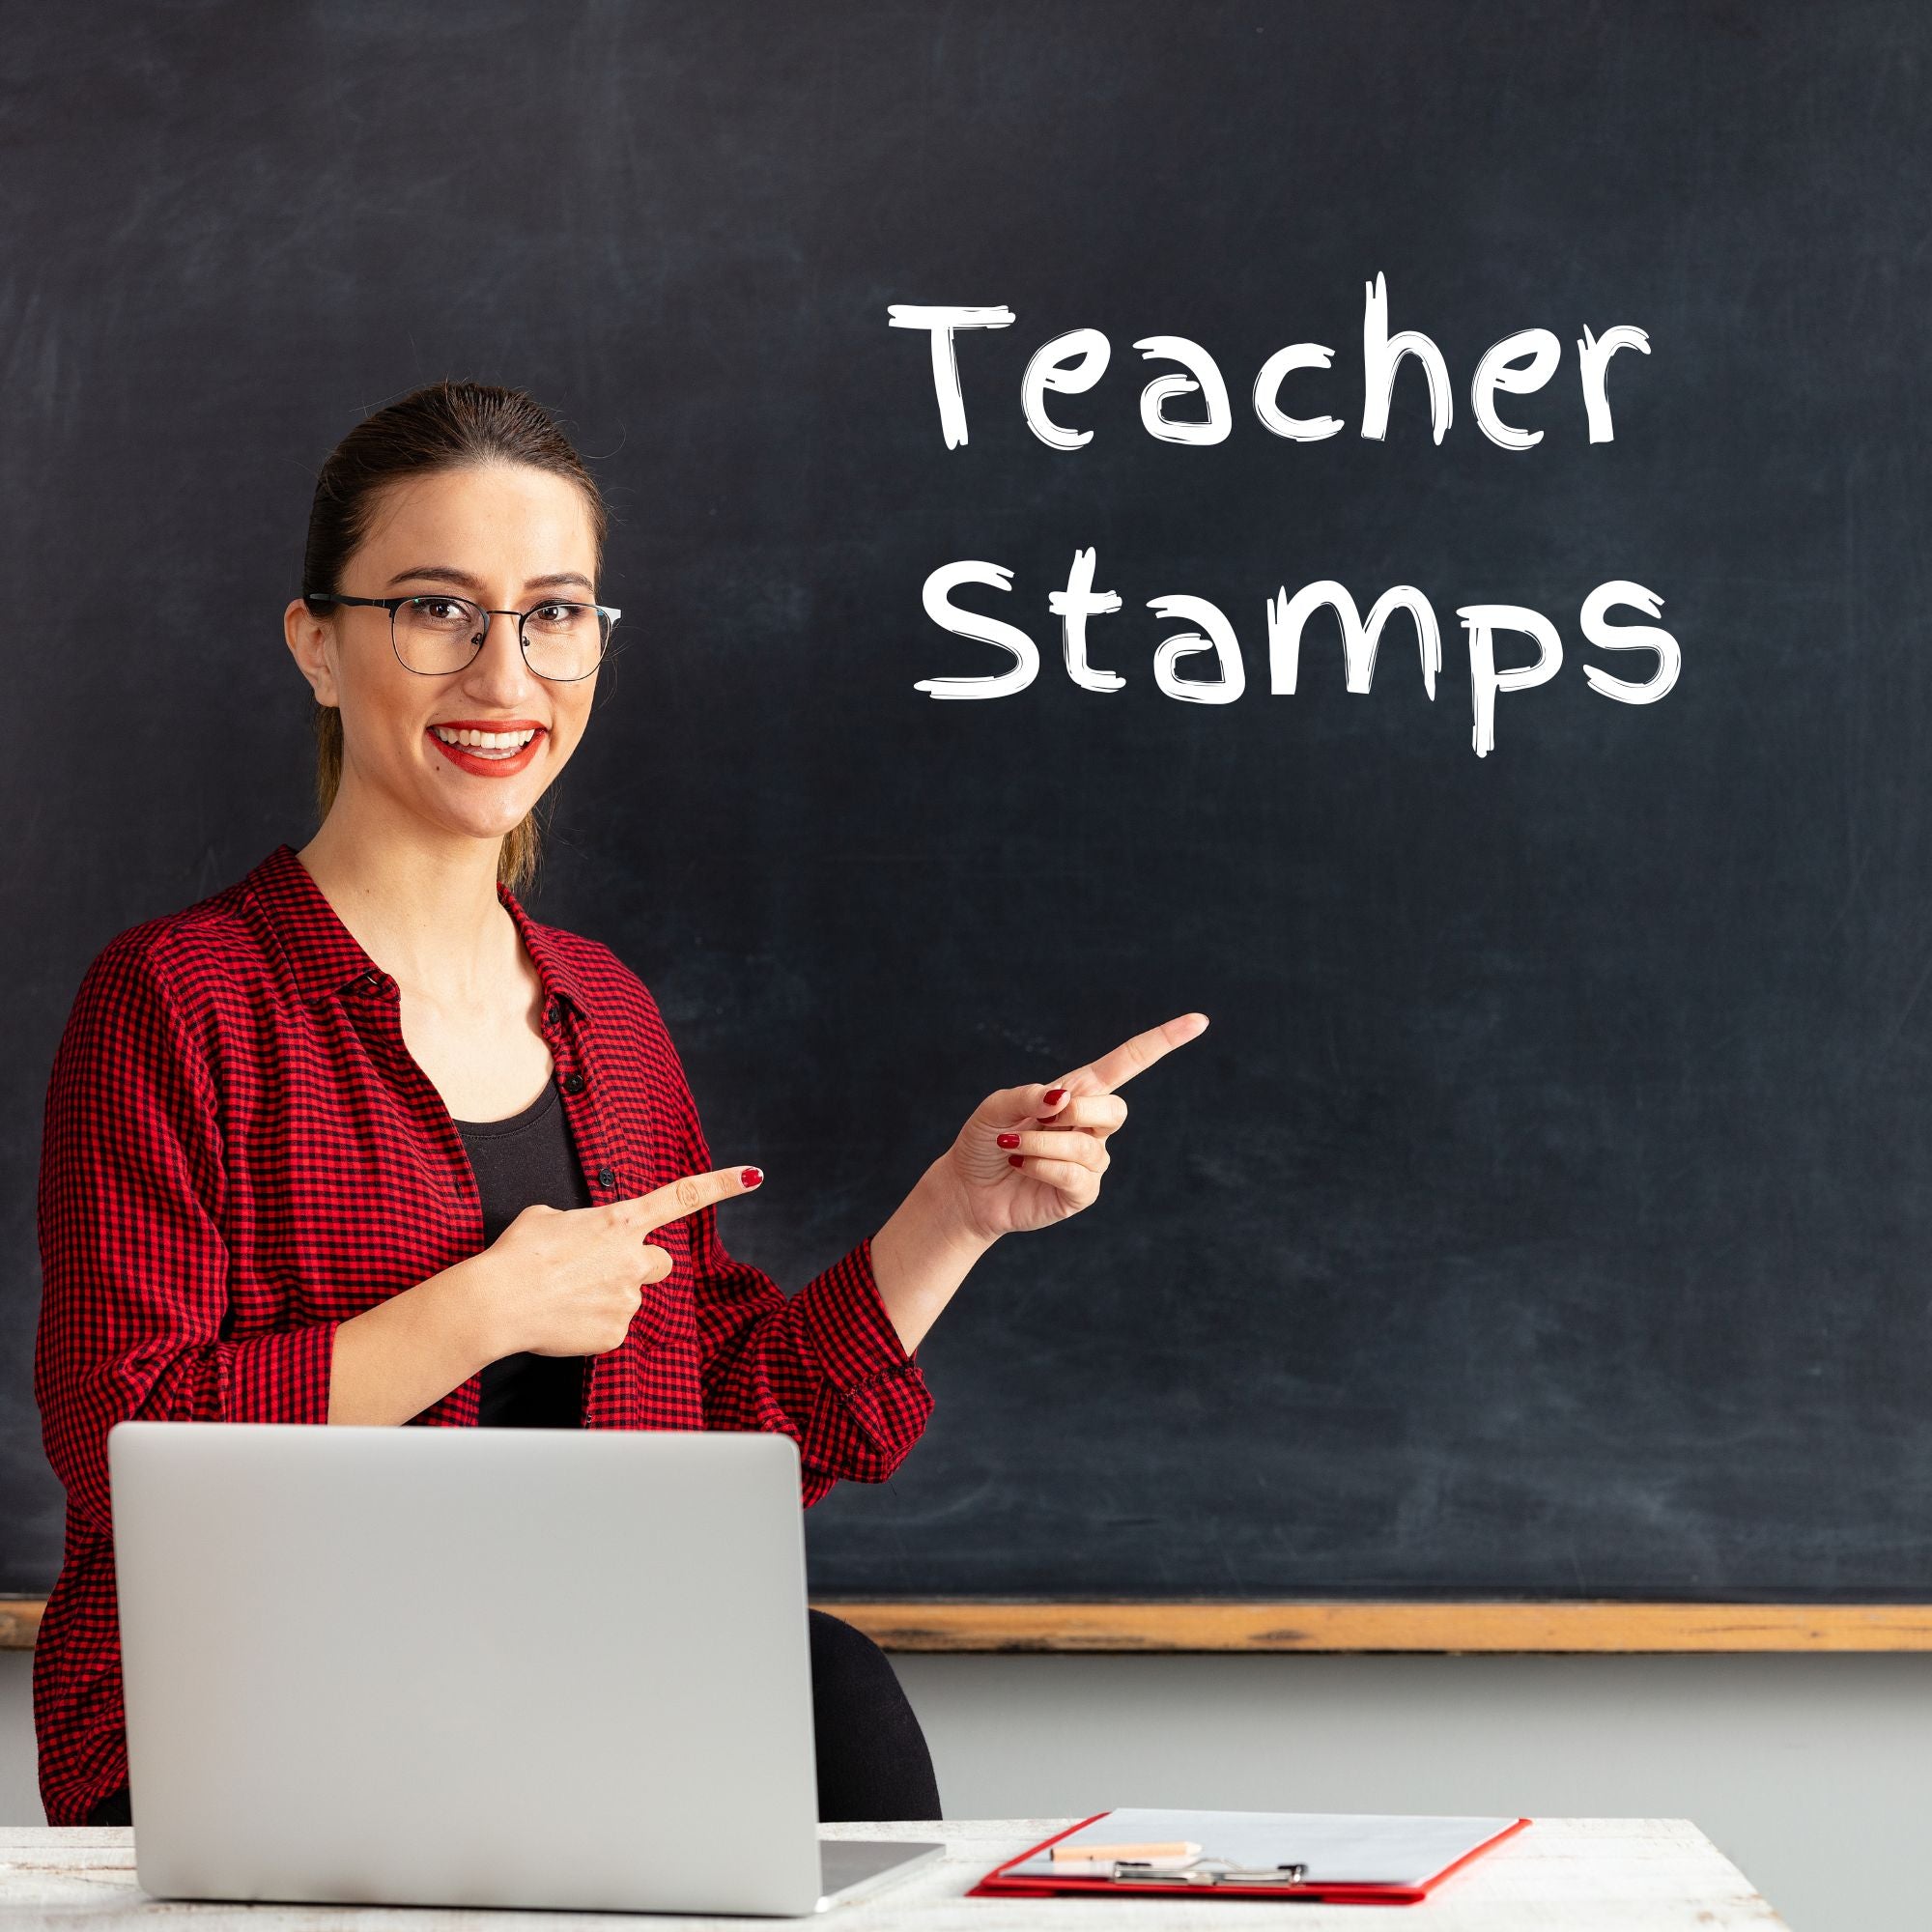 Teacher Pointing to Teacher Stamps - custom rubber stamps for all teachers